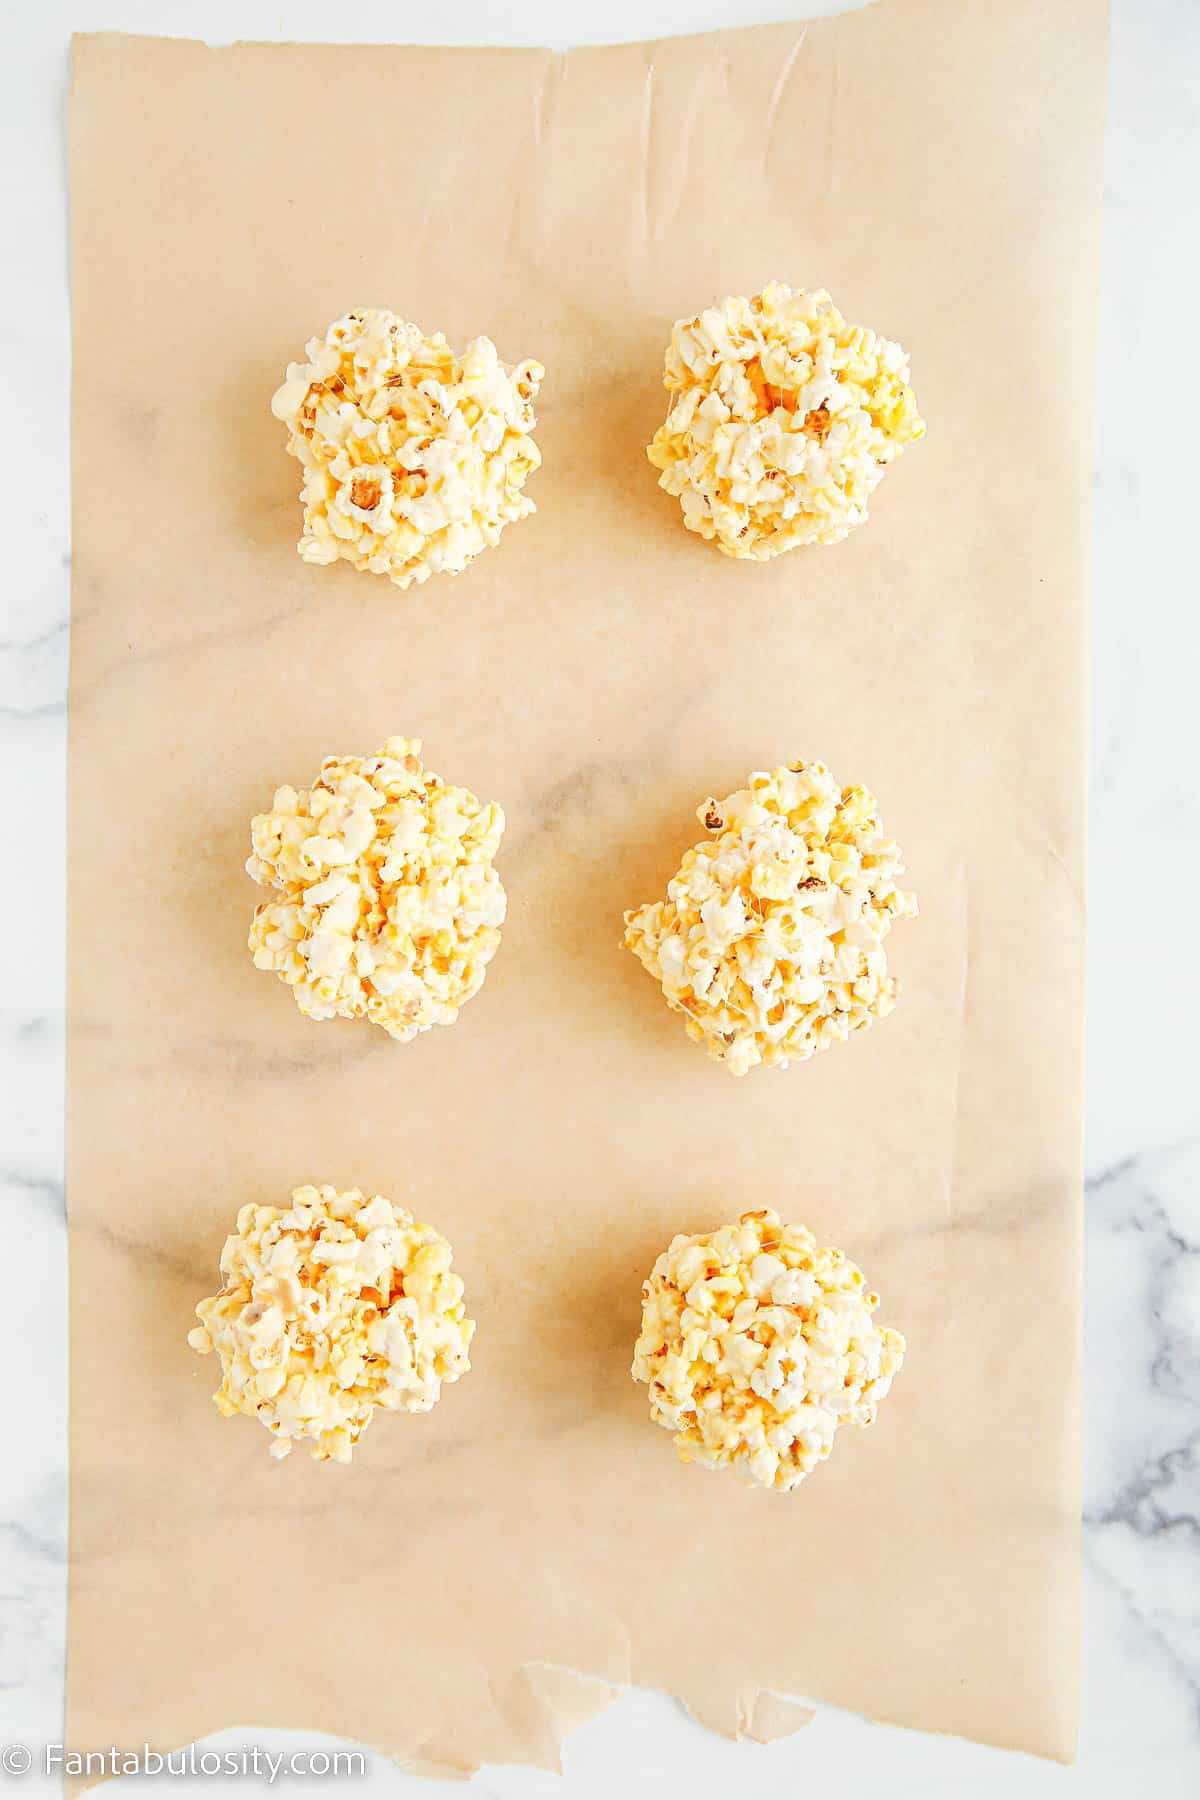 6 round marshmallow popcorn balls have been placed on a piece of parchment paper